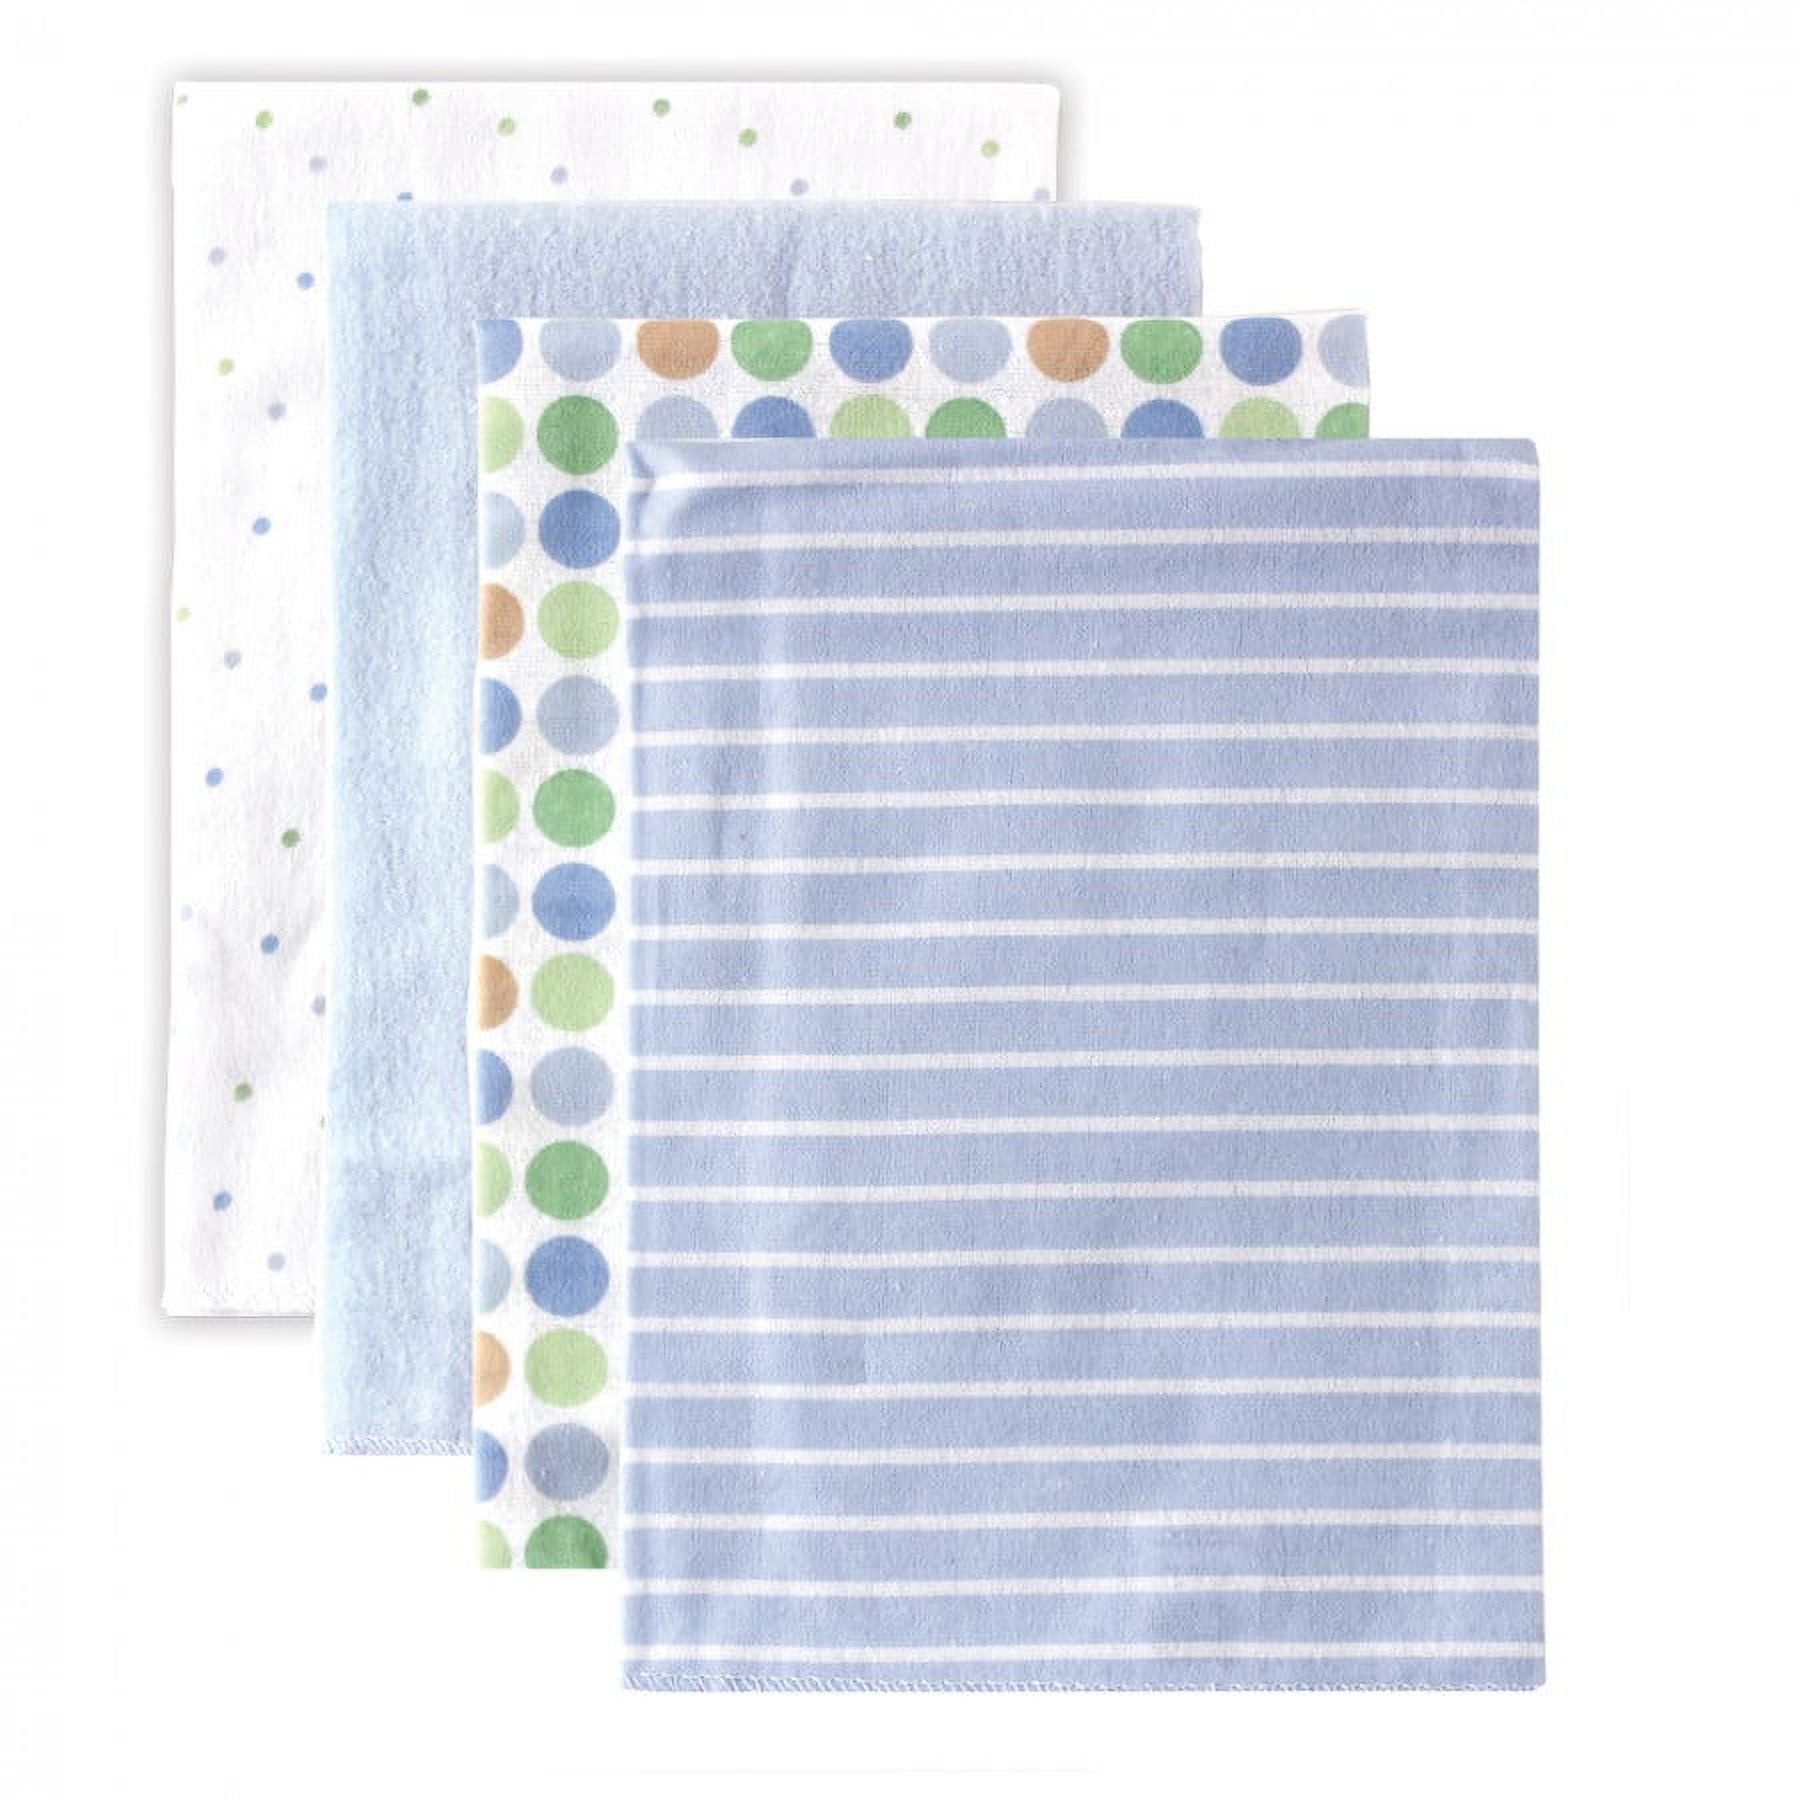 Luvable Friends Baby Boy Cotton Flannel Receiving Blankets, Blue Polka Dot, One Size - image 1 of 2